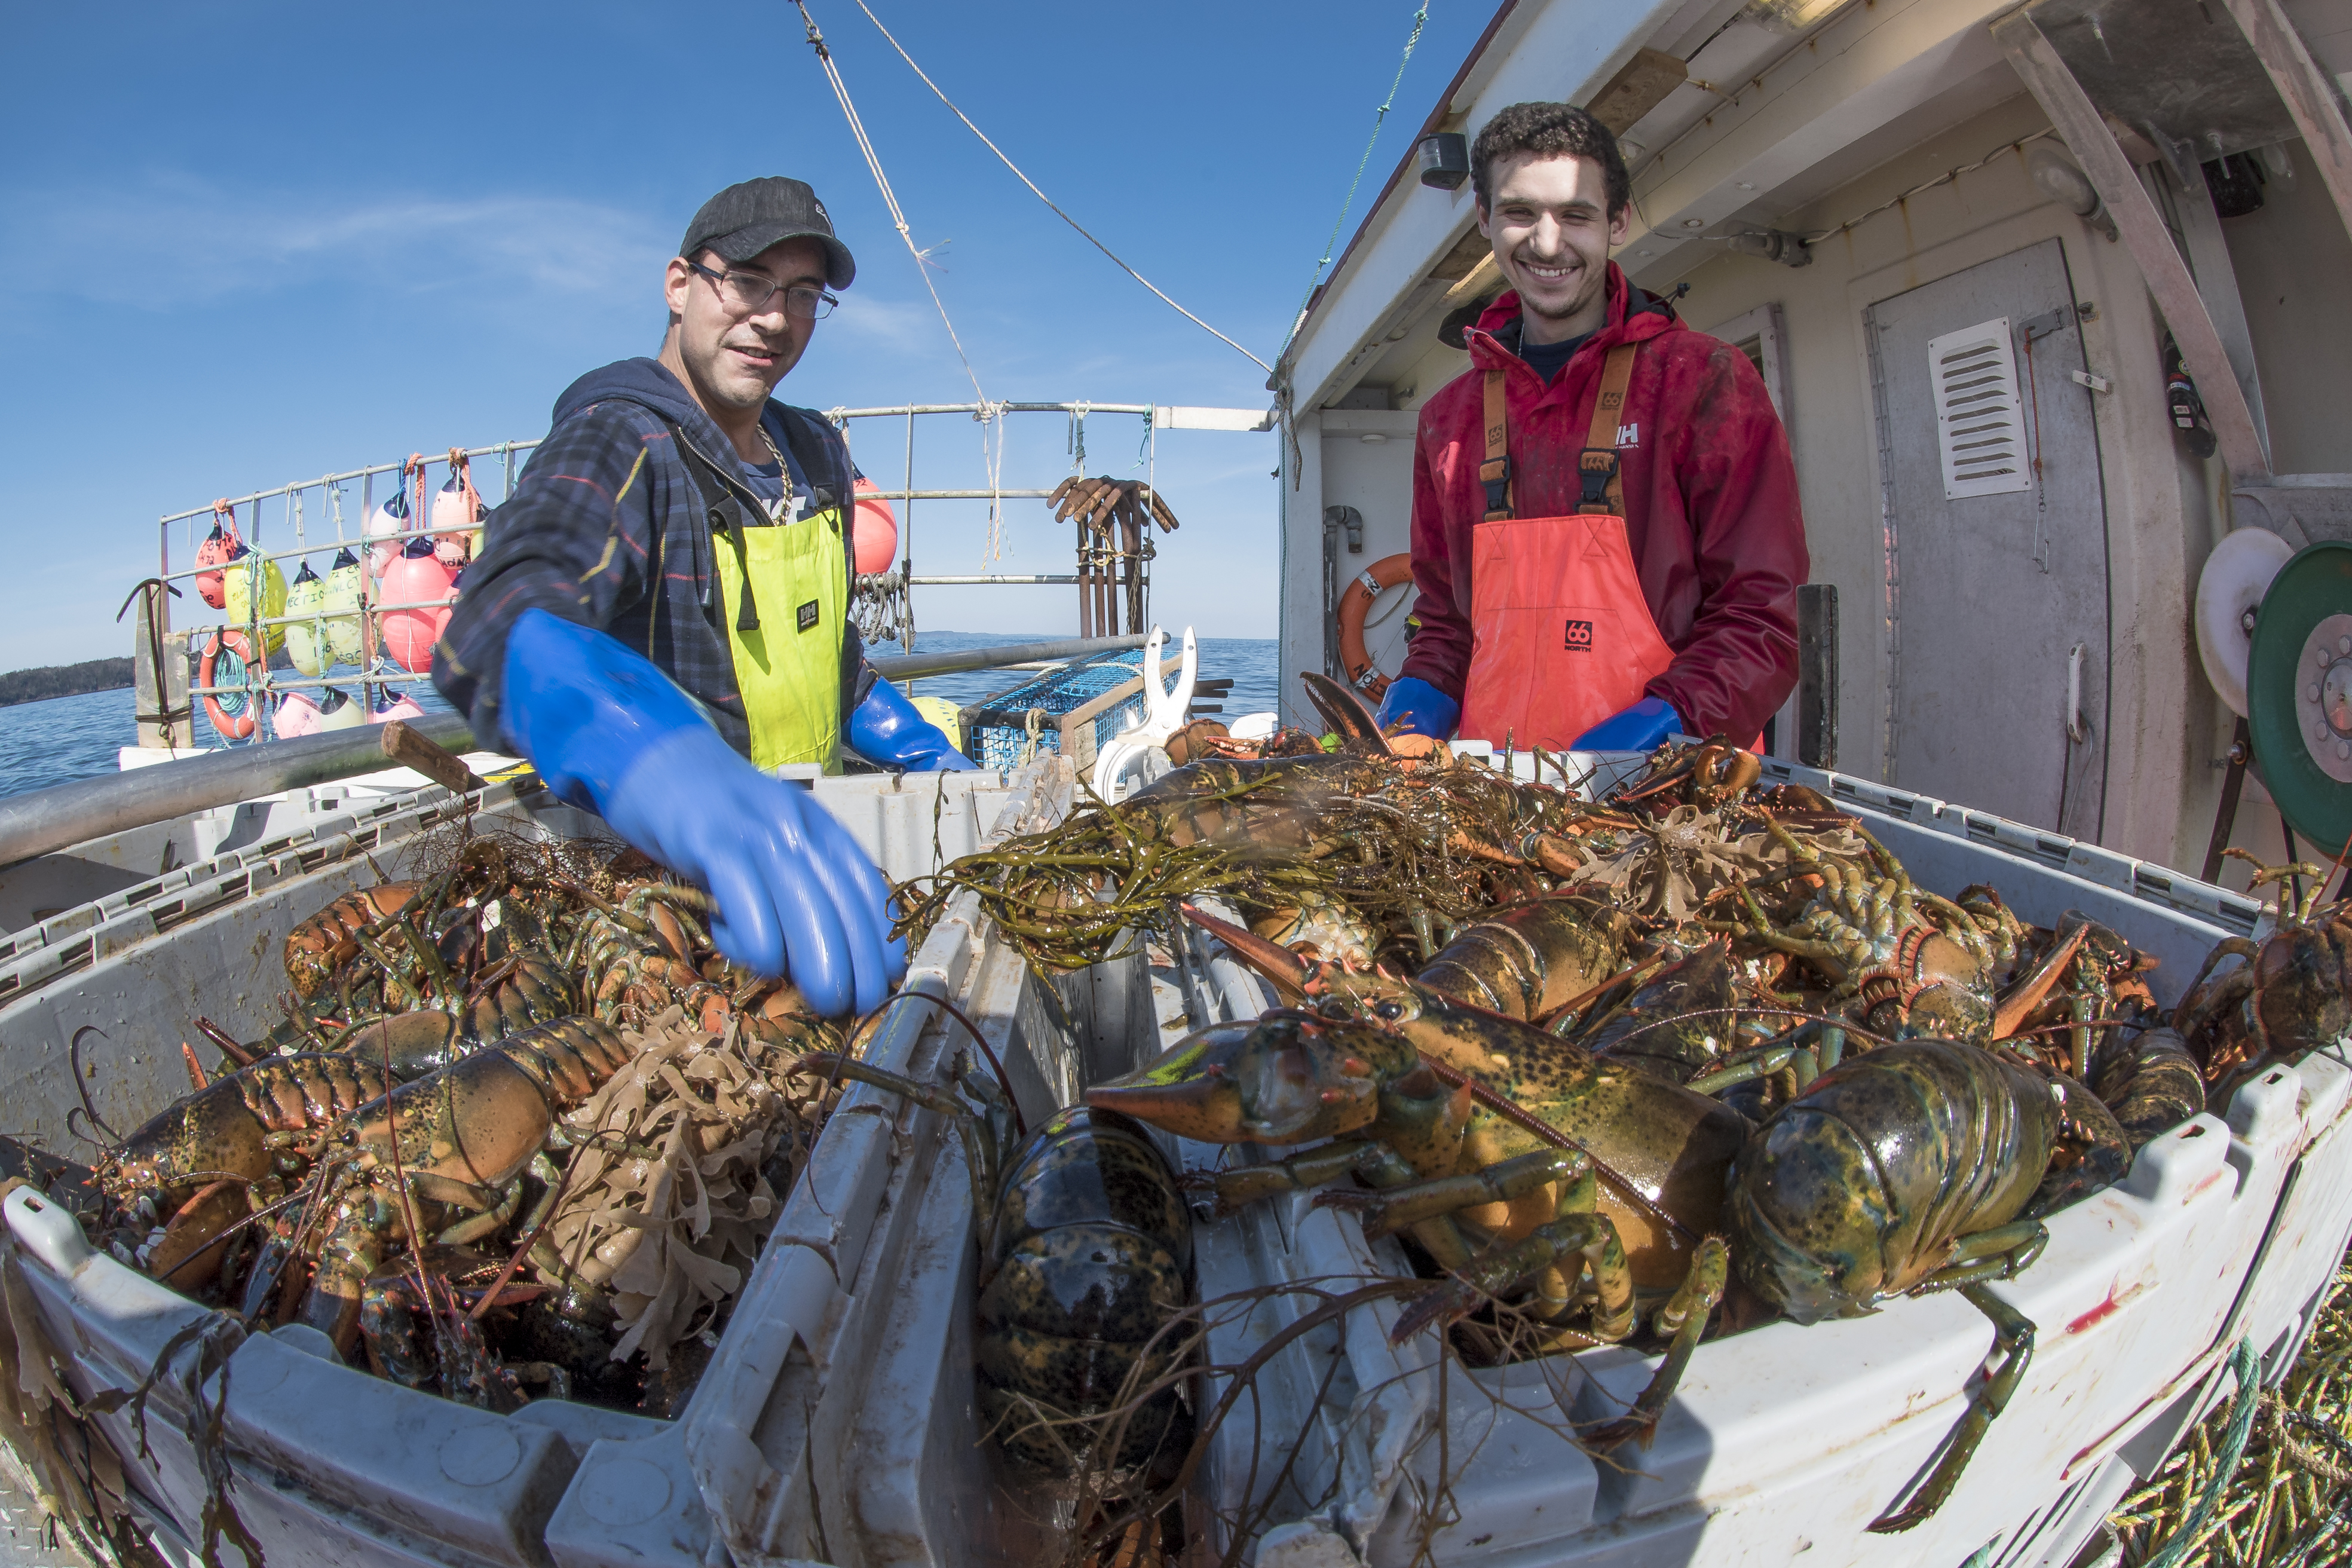 Canadian fishermen want cheaper lobster bait. Americans want to